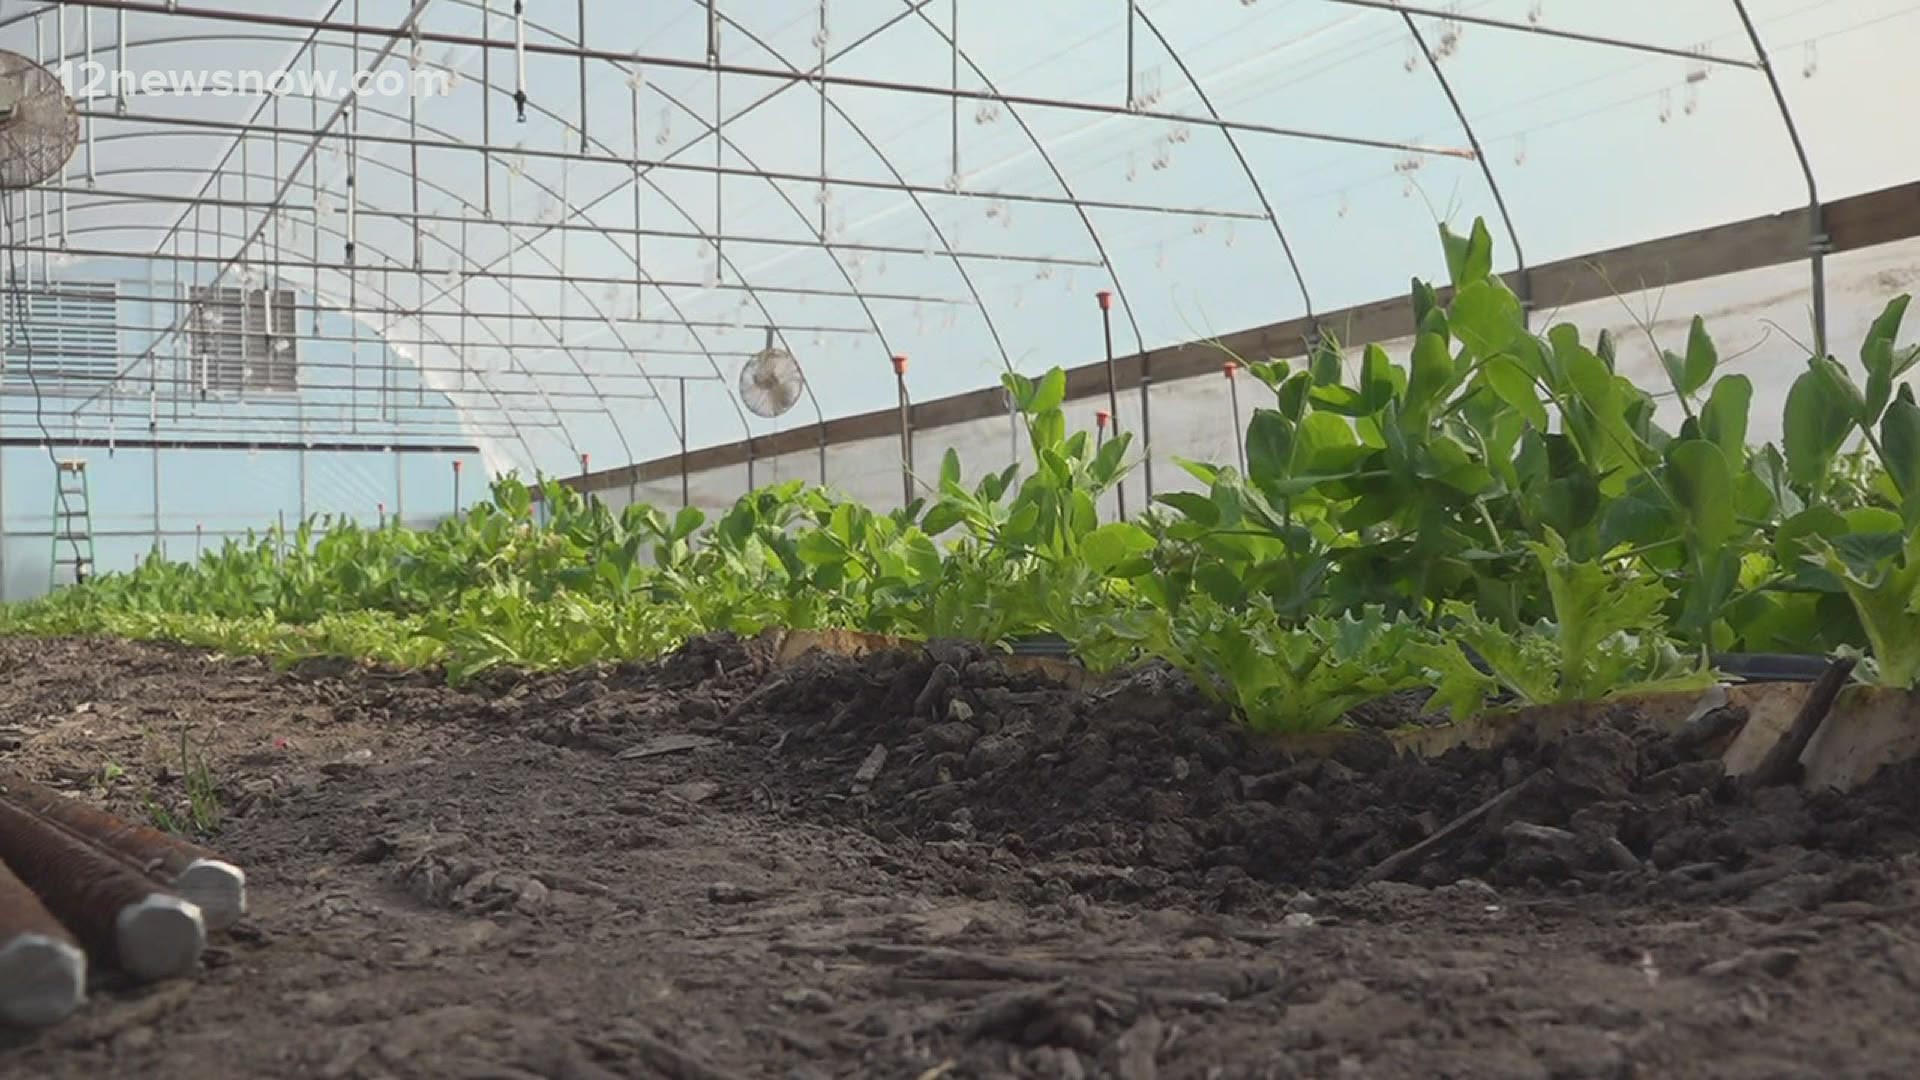 Many Texas farmers are having to start over after the freeze killed crops and livestock.